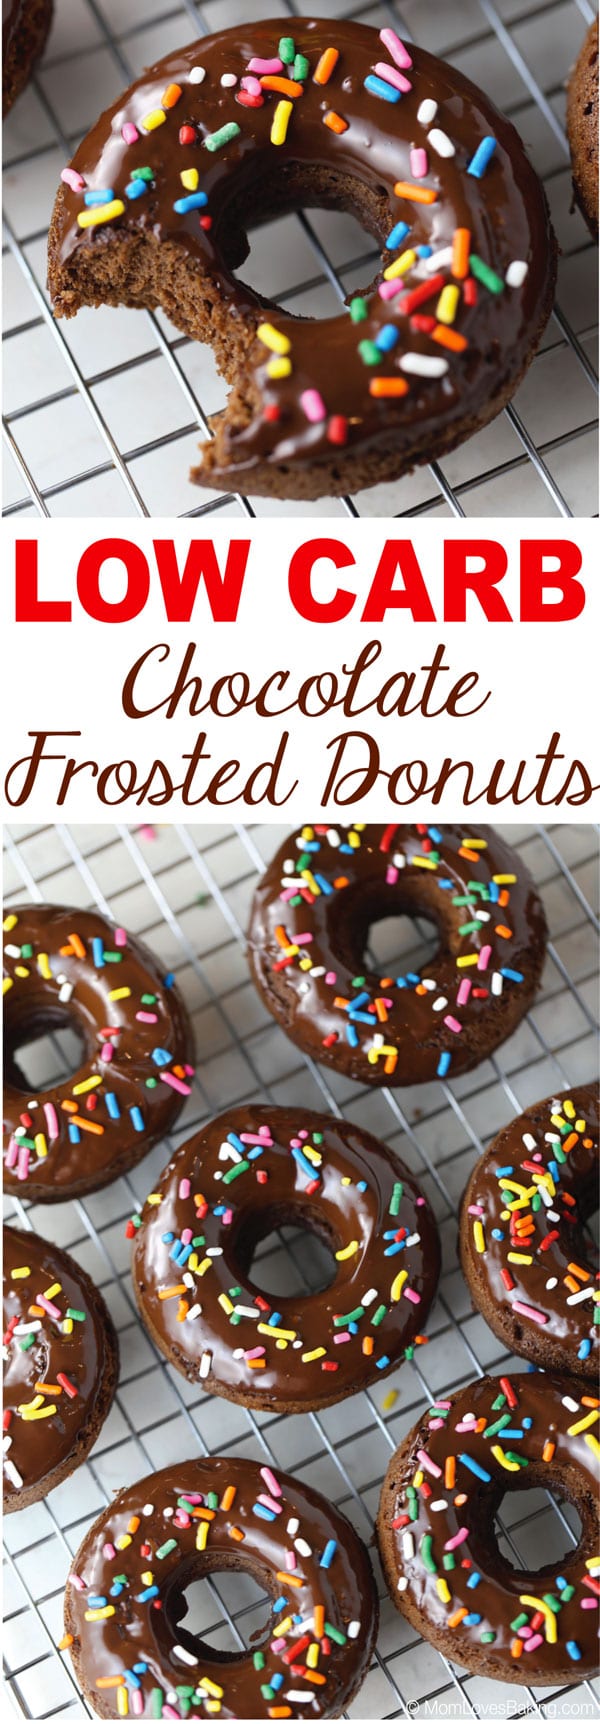 Low carb paleo gluten free chocolate donuts